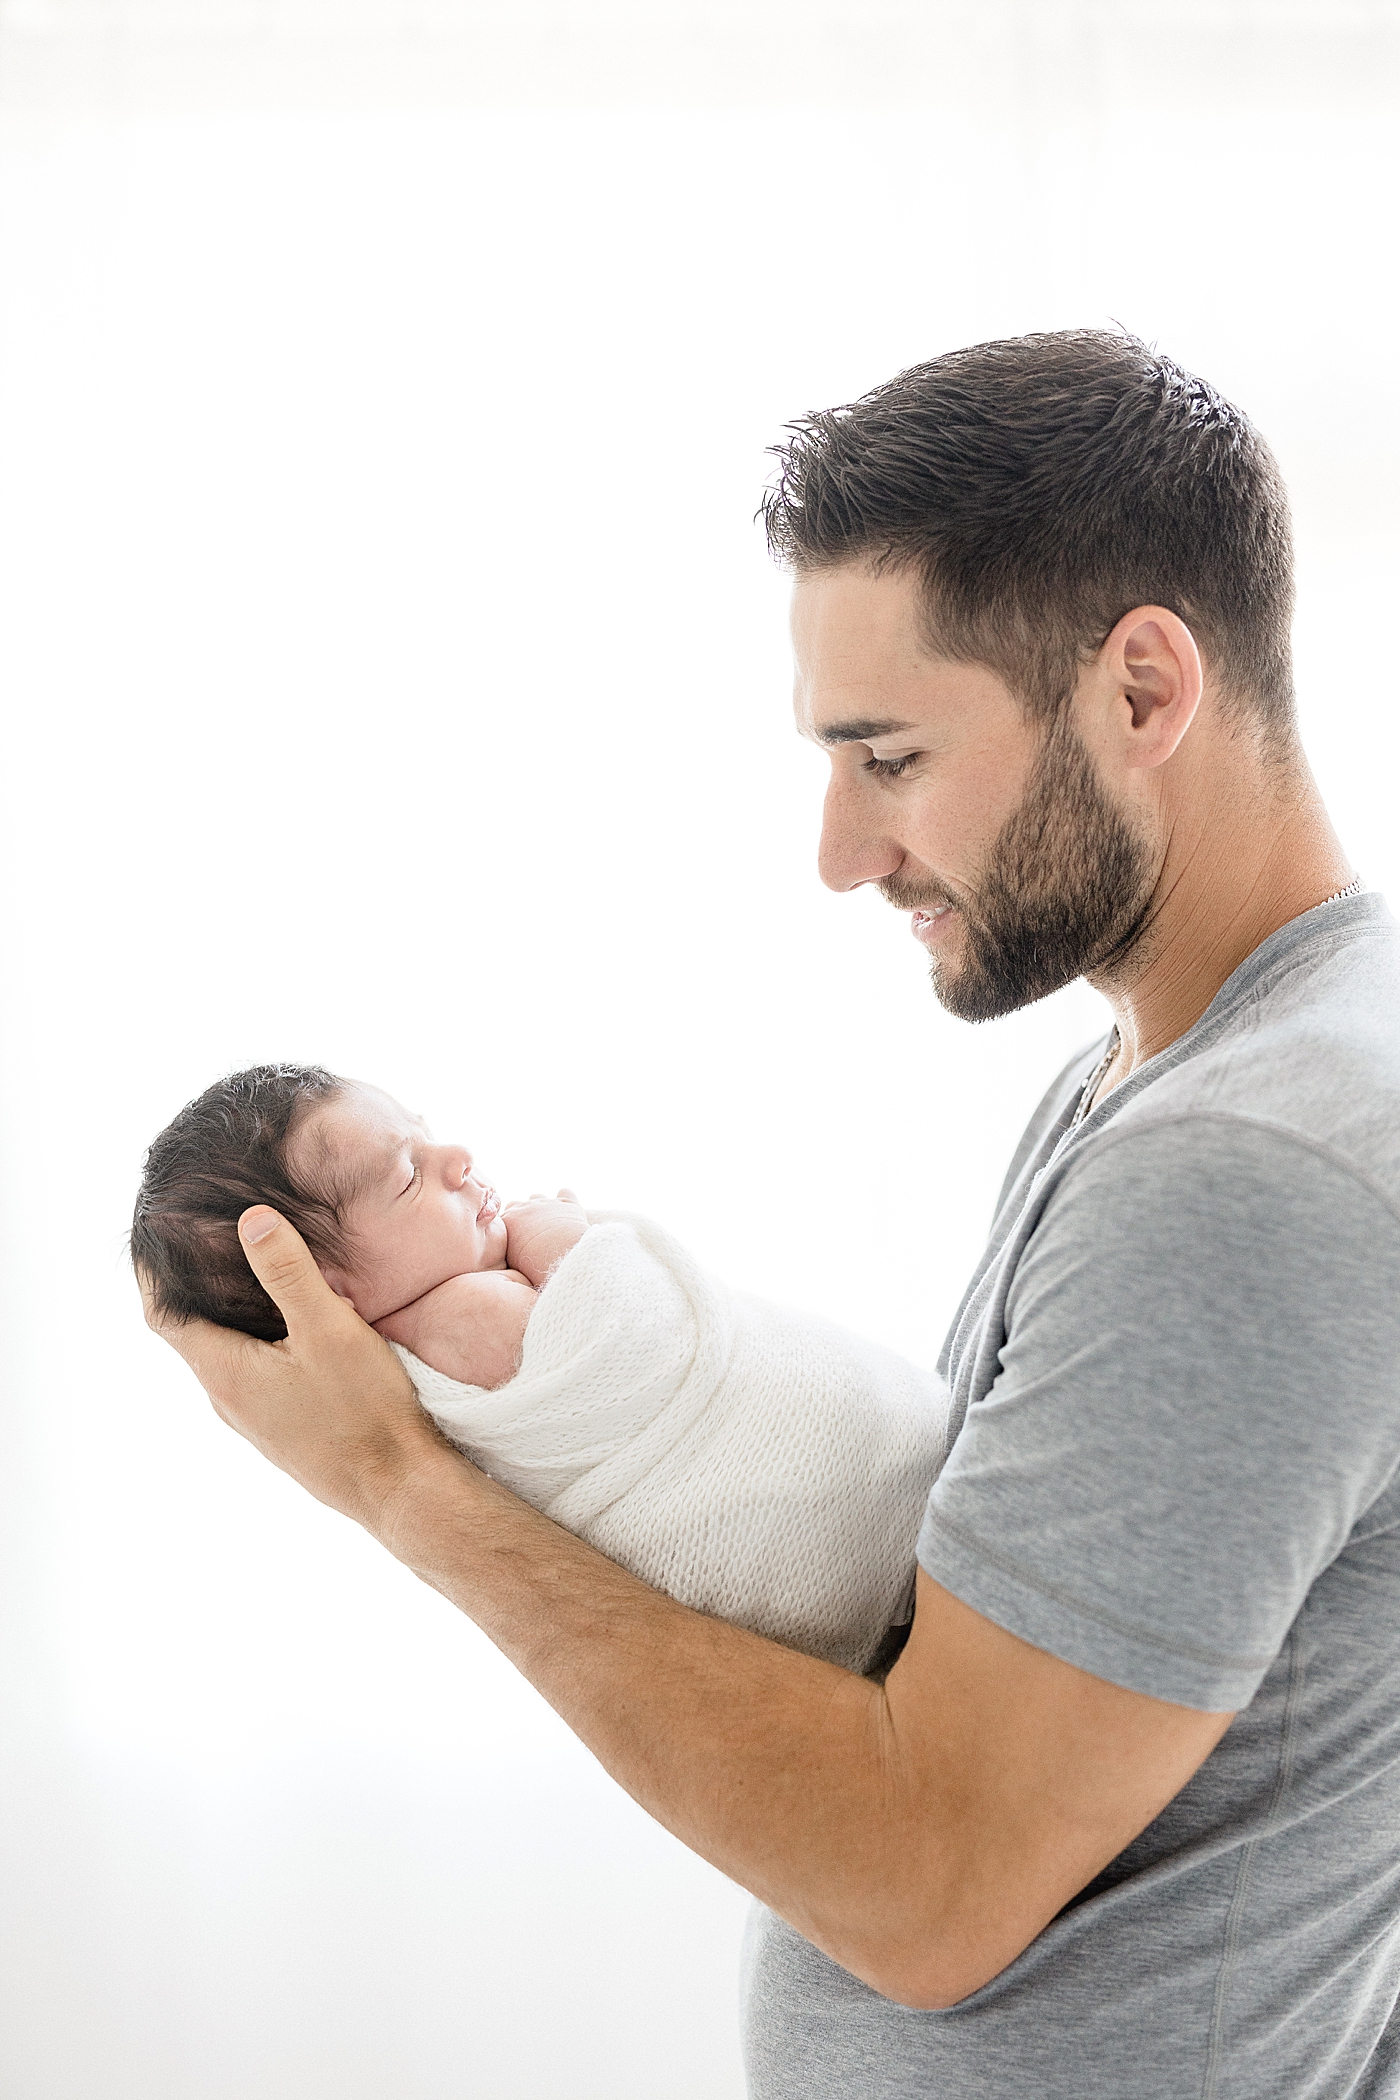 Kevin Kiermaier, center fielder for the Tampa Bay Rays, welcomes baby boy, Krew. Photo by Brittany Elise Photography.